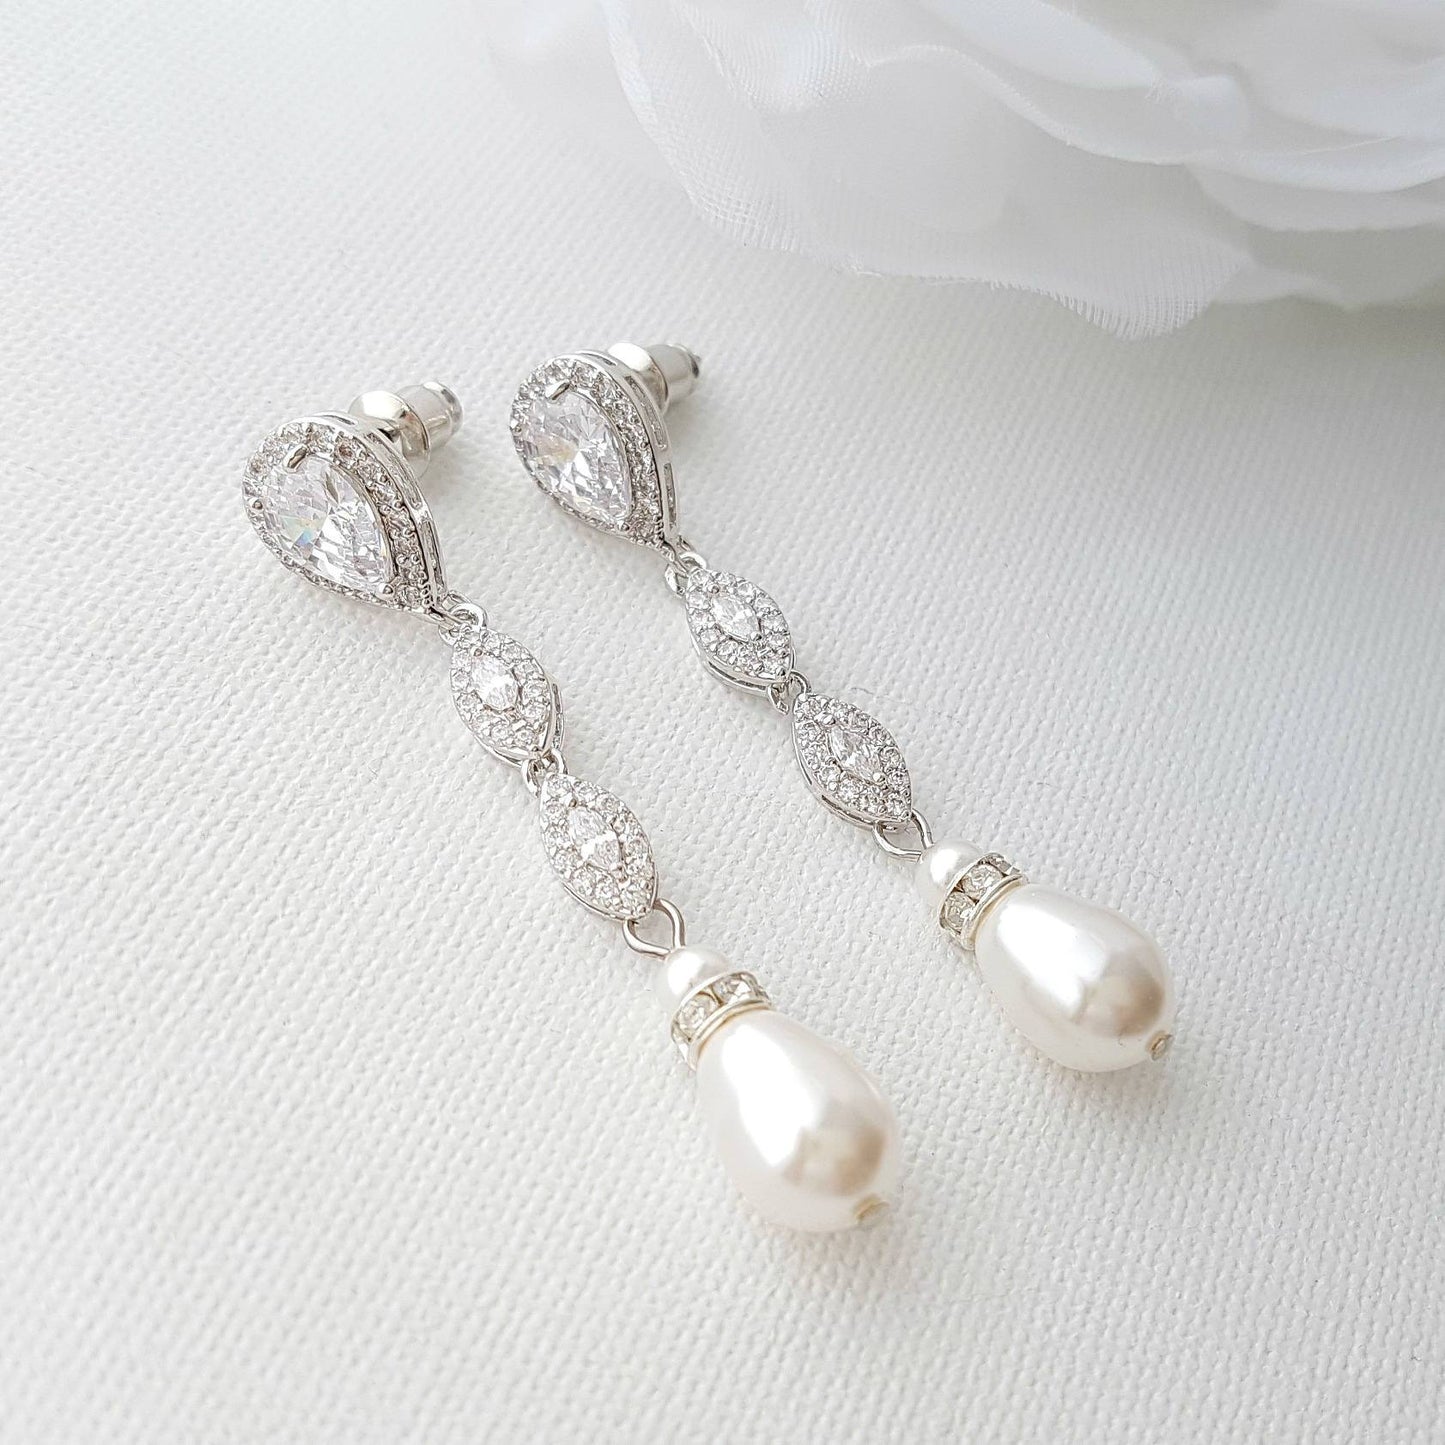 Silver pearl drop earrings for the brides